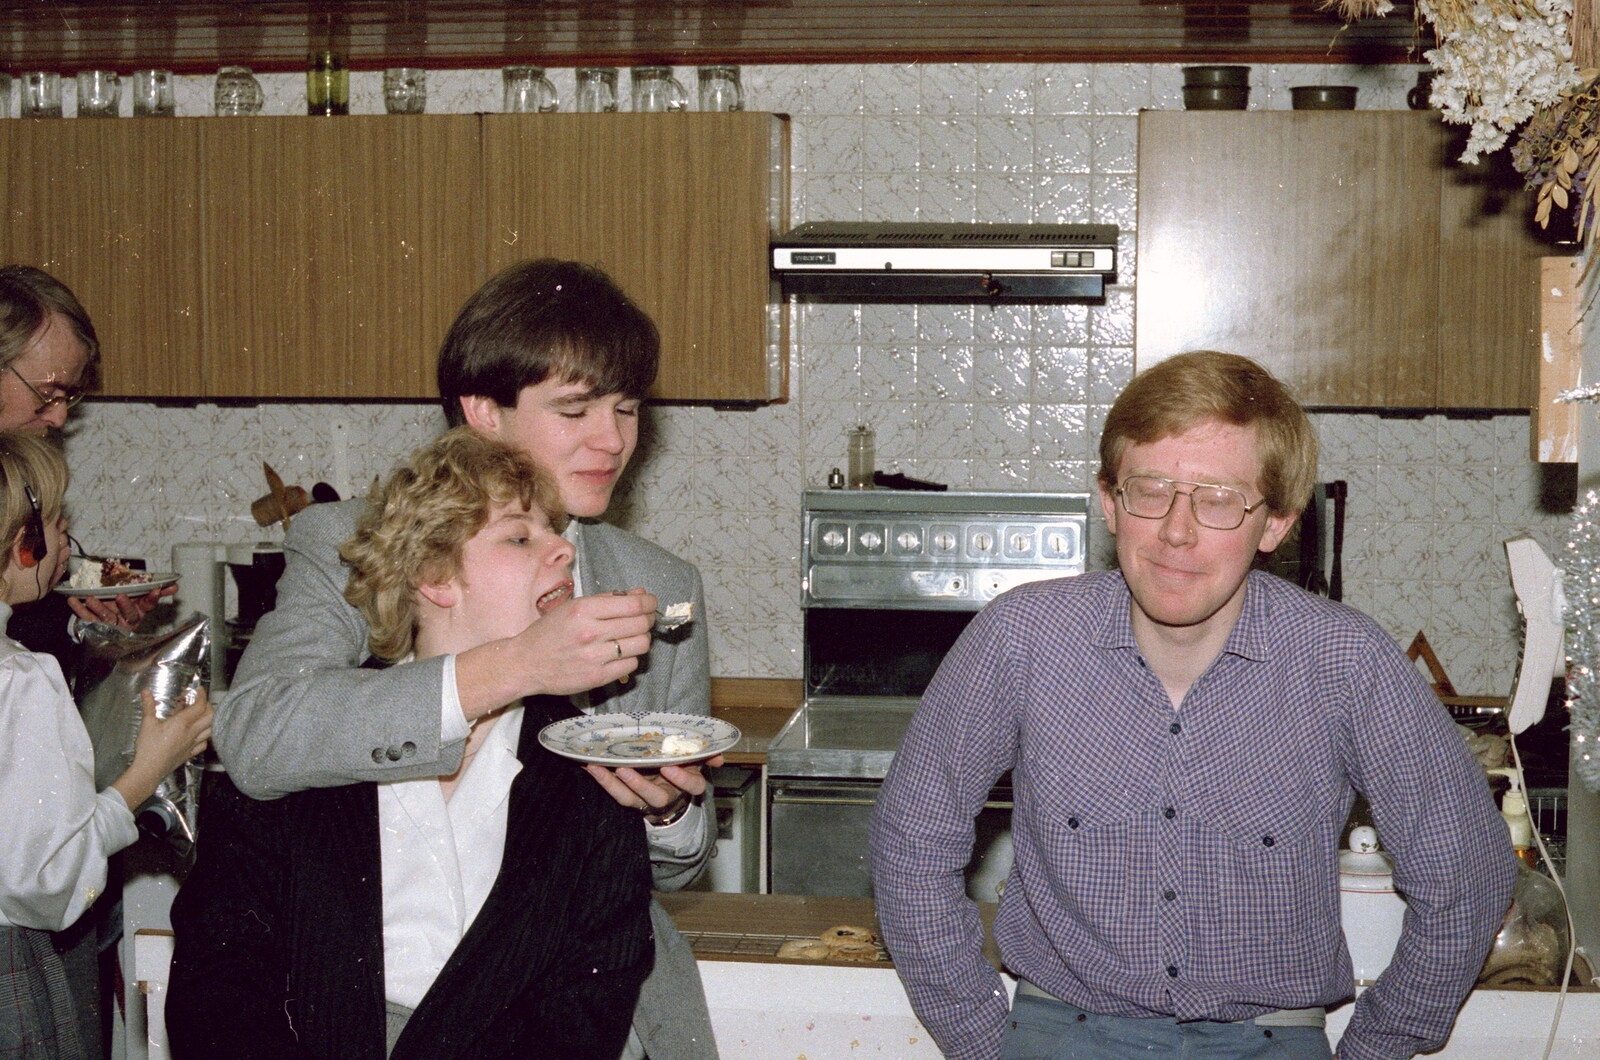 Phil feeds Anna some cake from New Year's Eve at Anna's, Walkford, Dorset - 31st December 1985